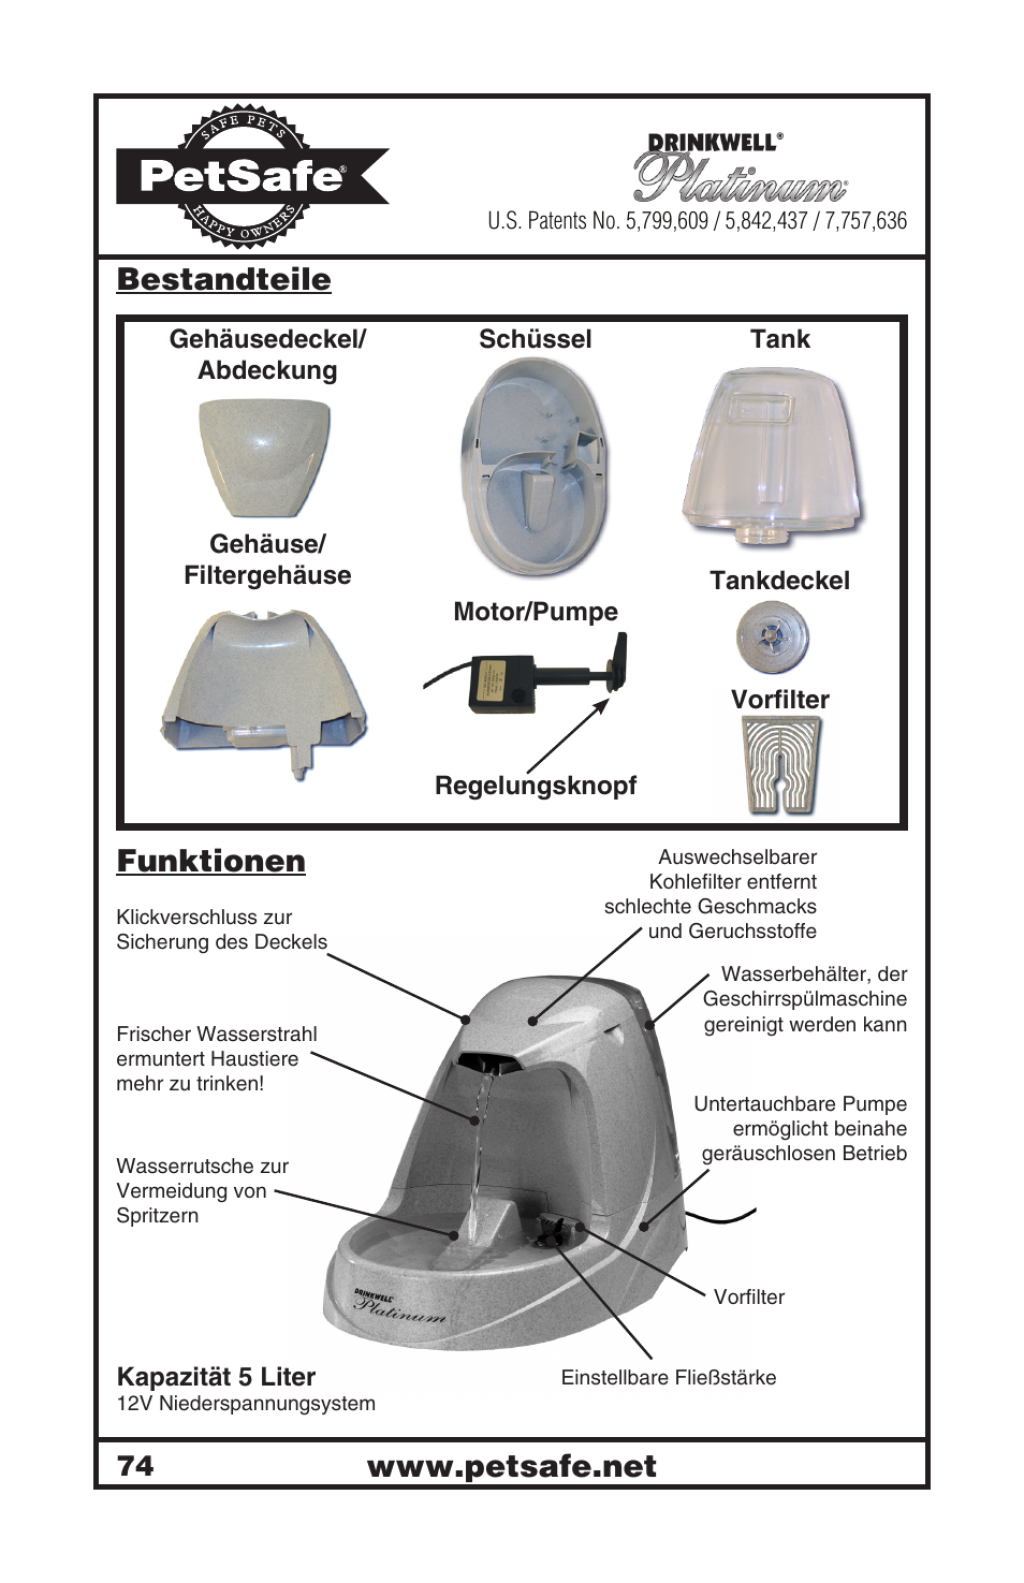 Picture of: Bestandteile funktionen  Petsafe Drinkwell® Platinum Pet Fountain